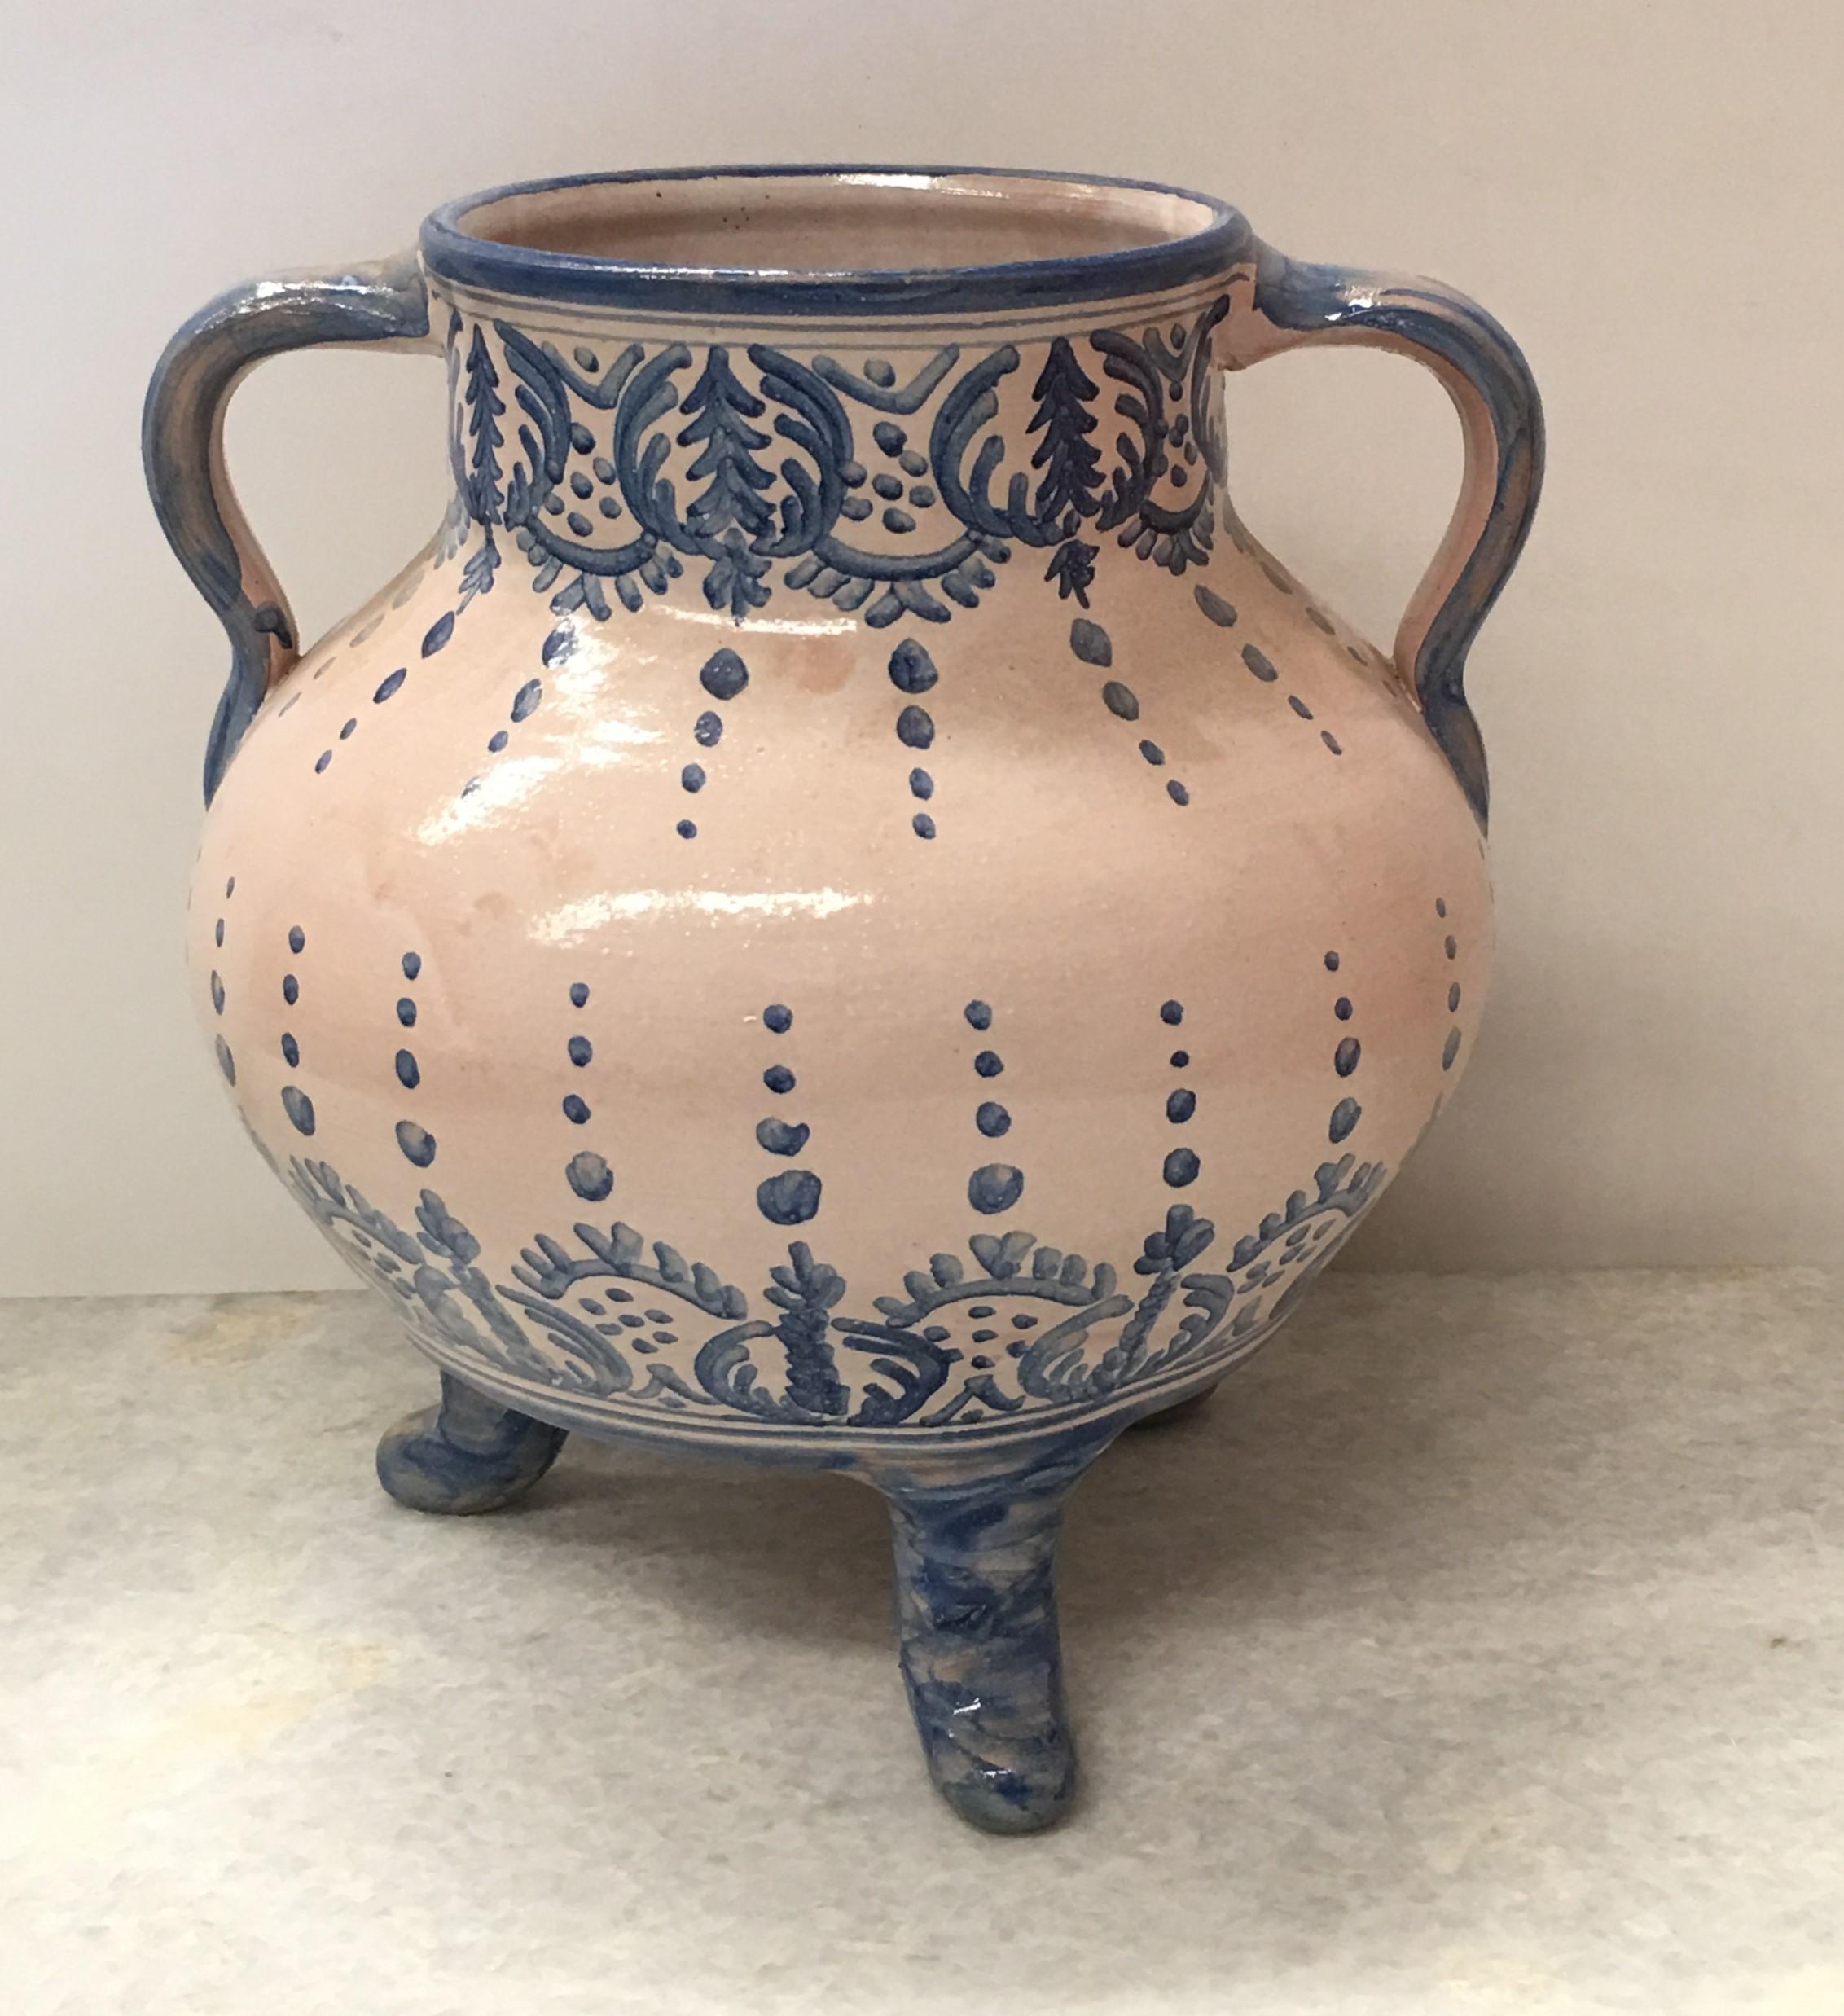 A striking Spanish glazed earthenware two-handled blue and white painted urn with foliate molded handles, the body underglaze blue decorated and three legs.